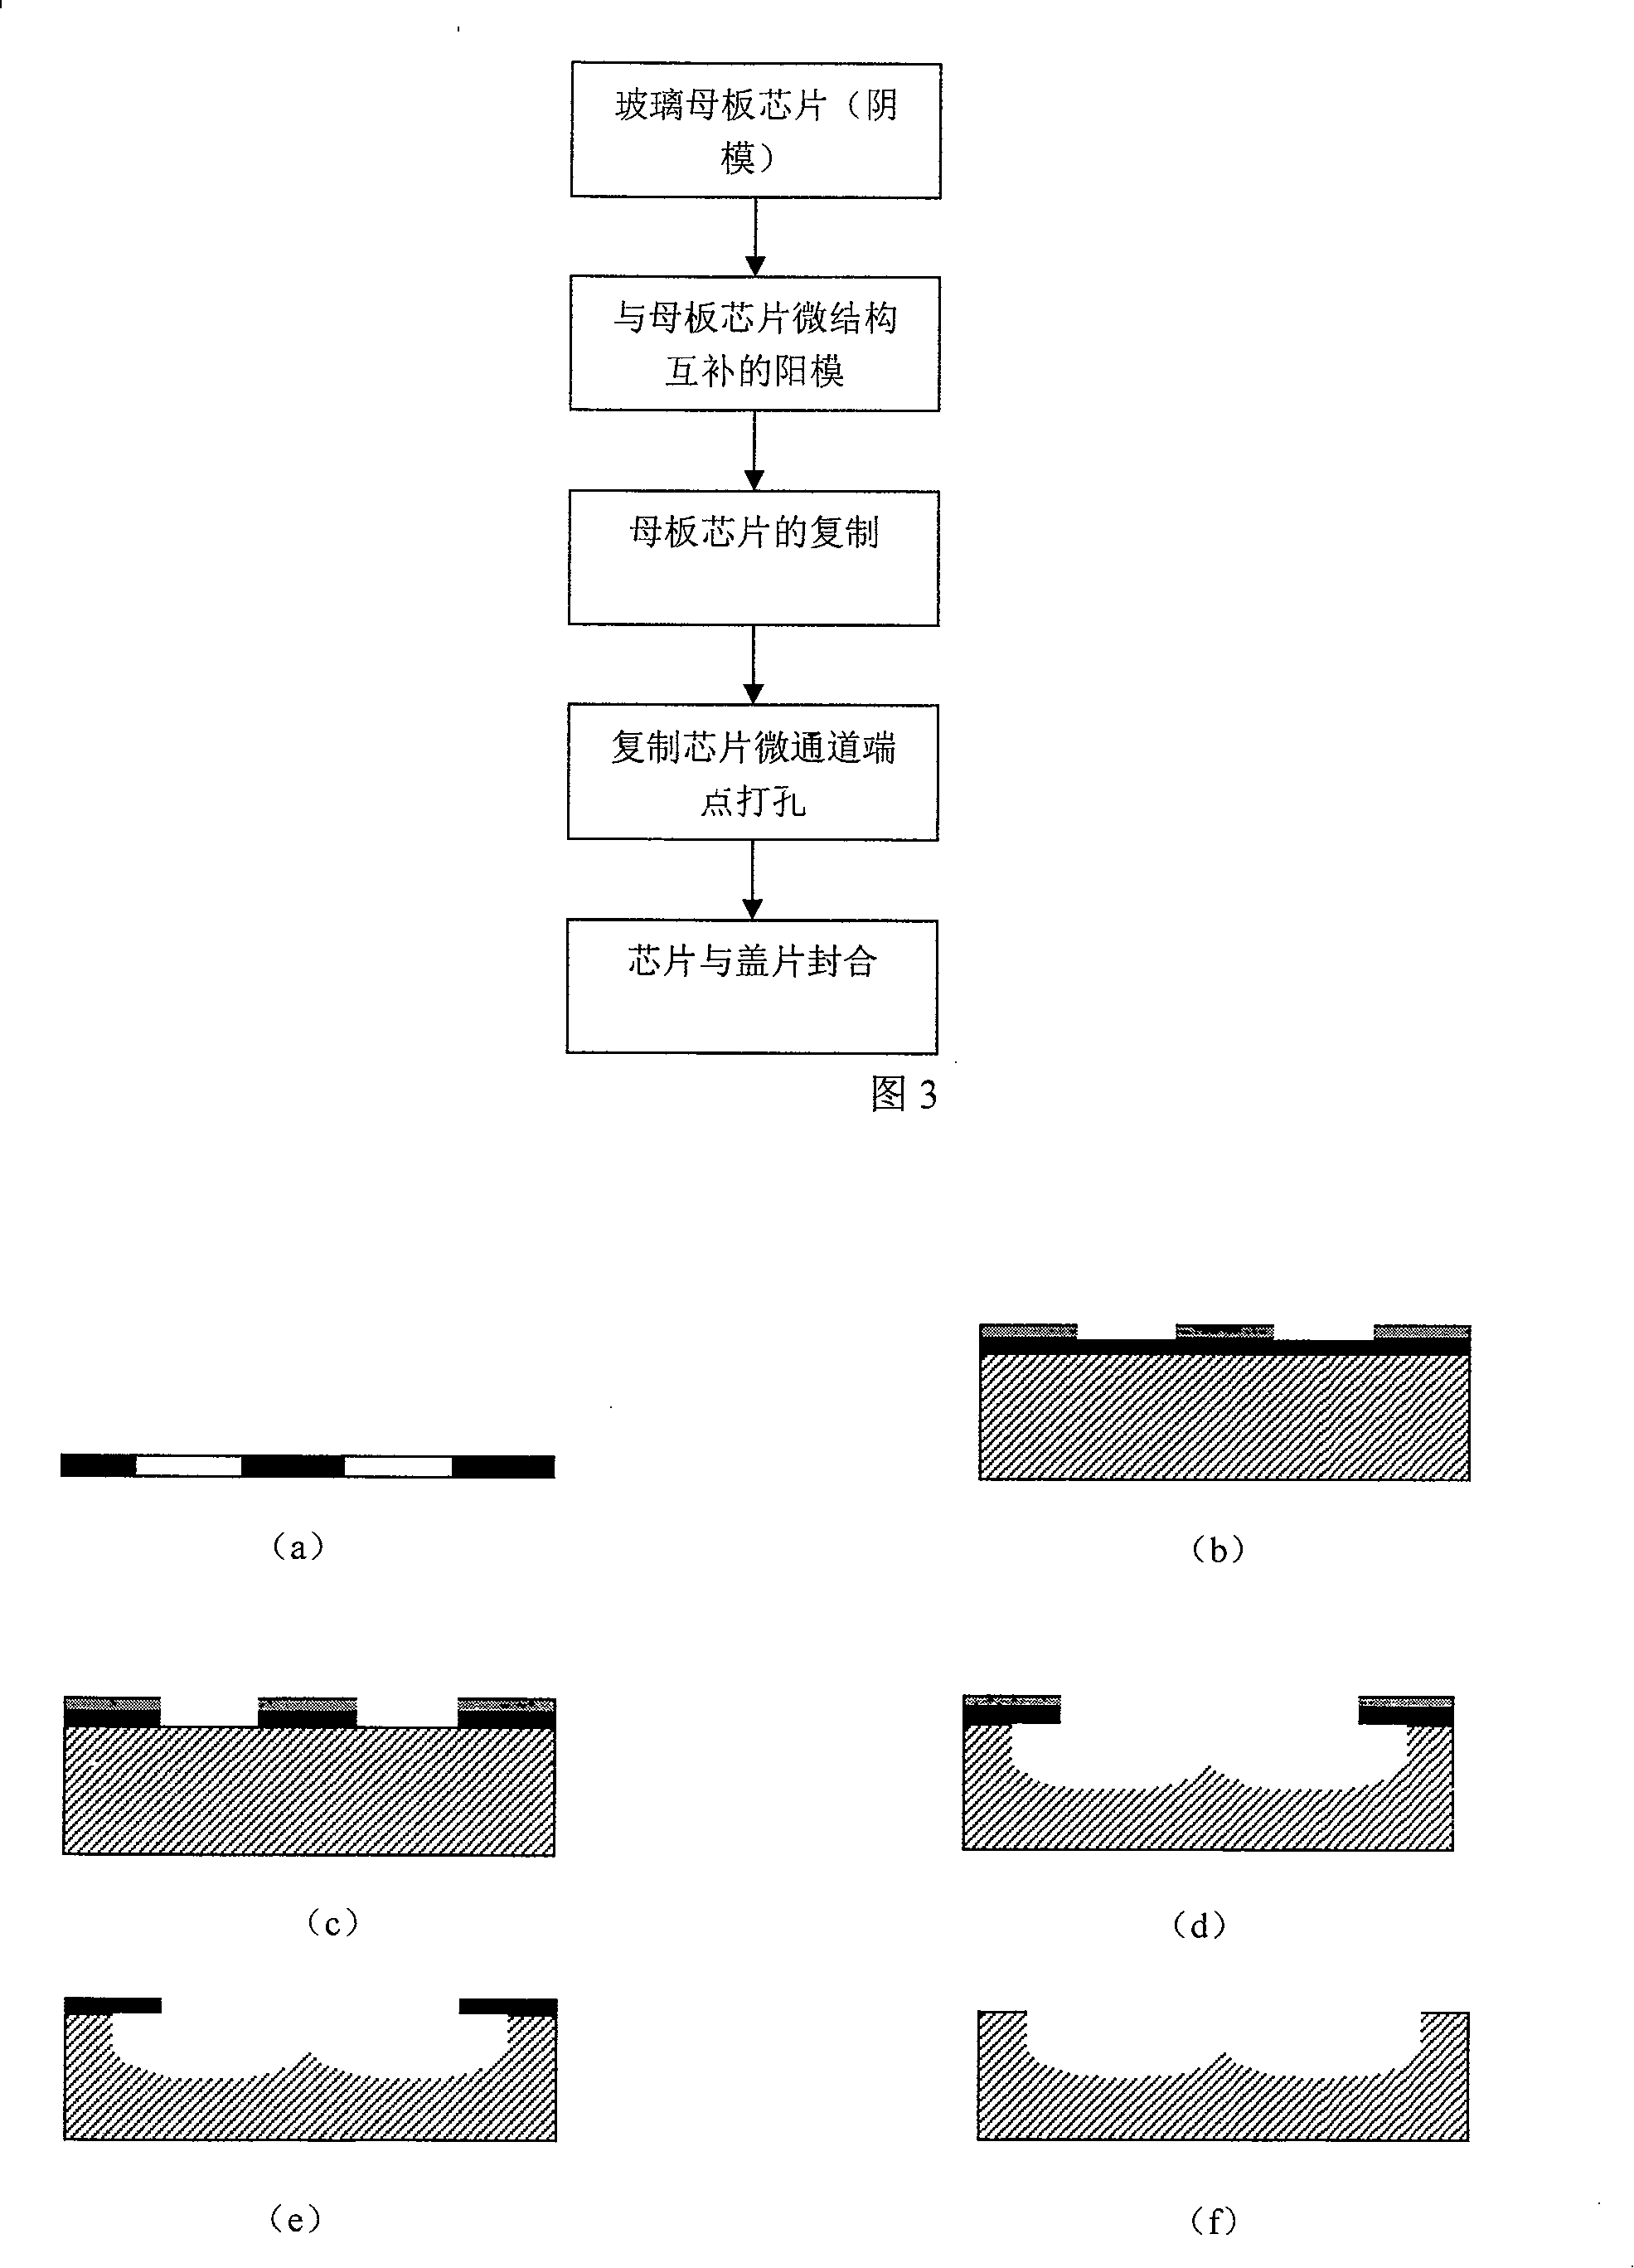 Method for producing passive micro-mixer and micro-reactor in micro-flow control chip